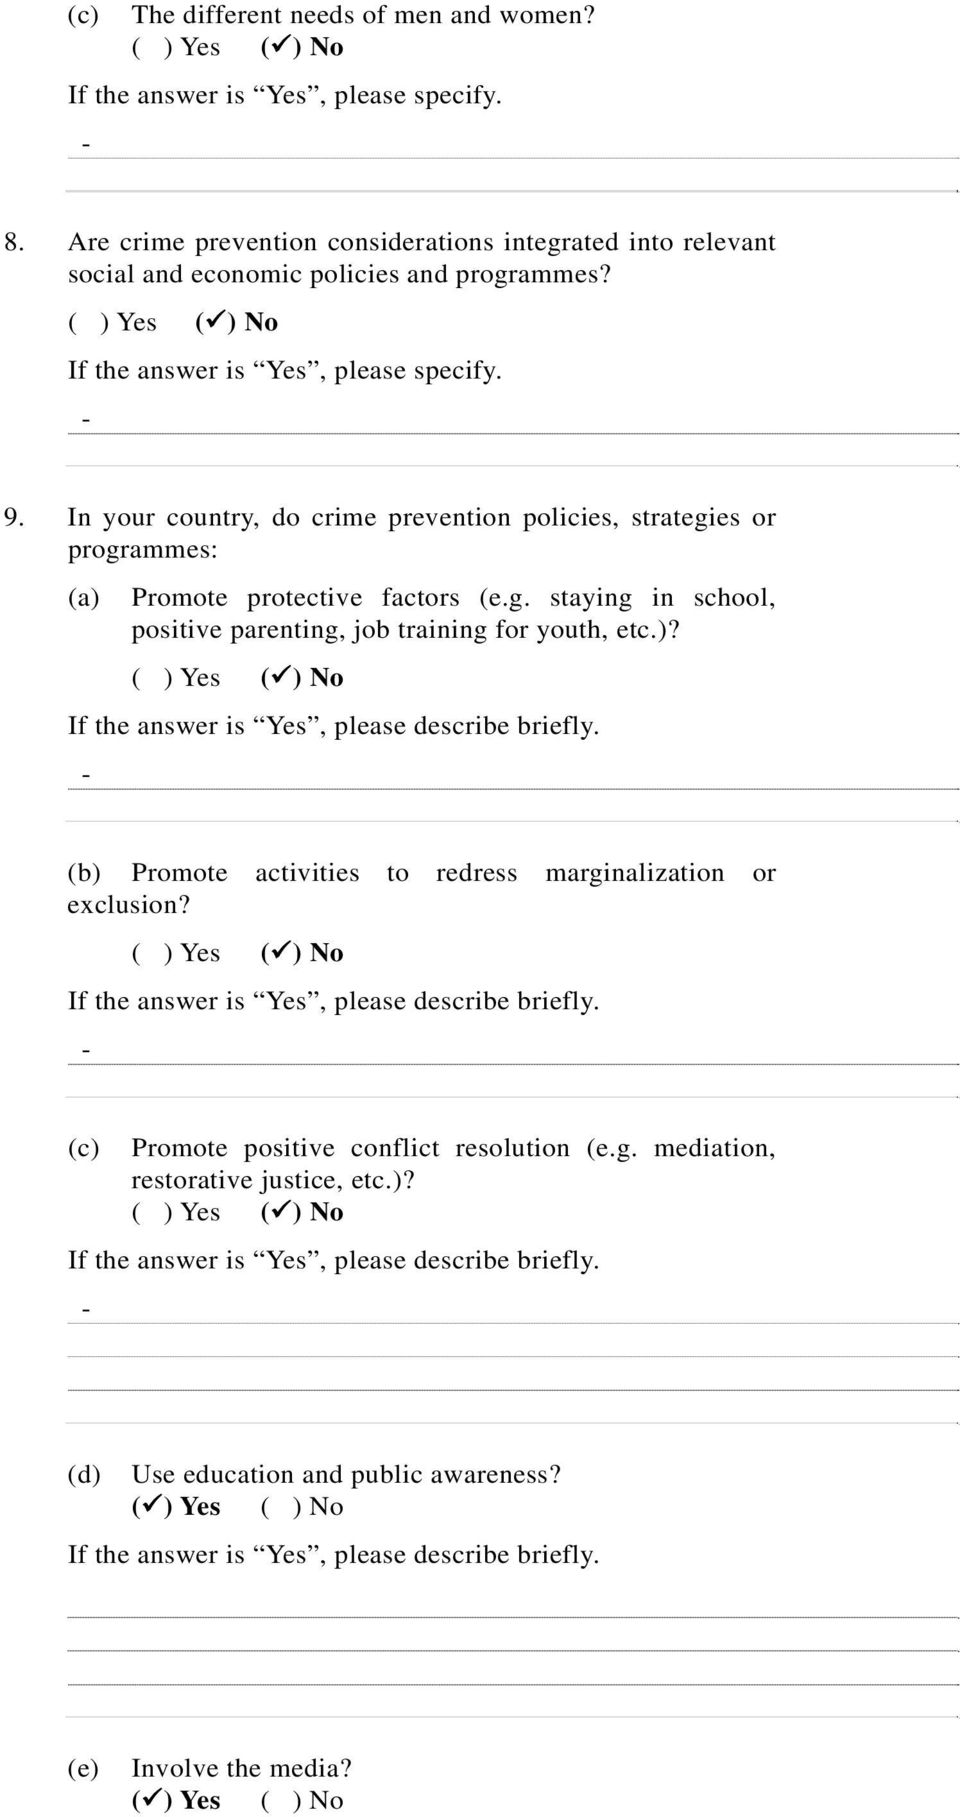 In your country, do crime prevention policies, strategies or programmes: (a) Promote protective factors (e.g. staying in school, positive parenting, job training for youth, etc.